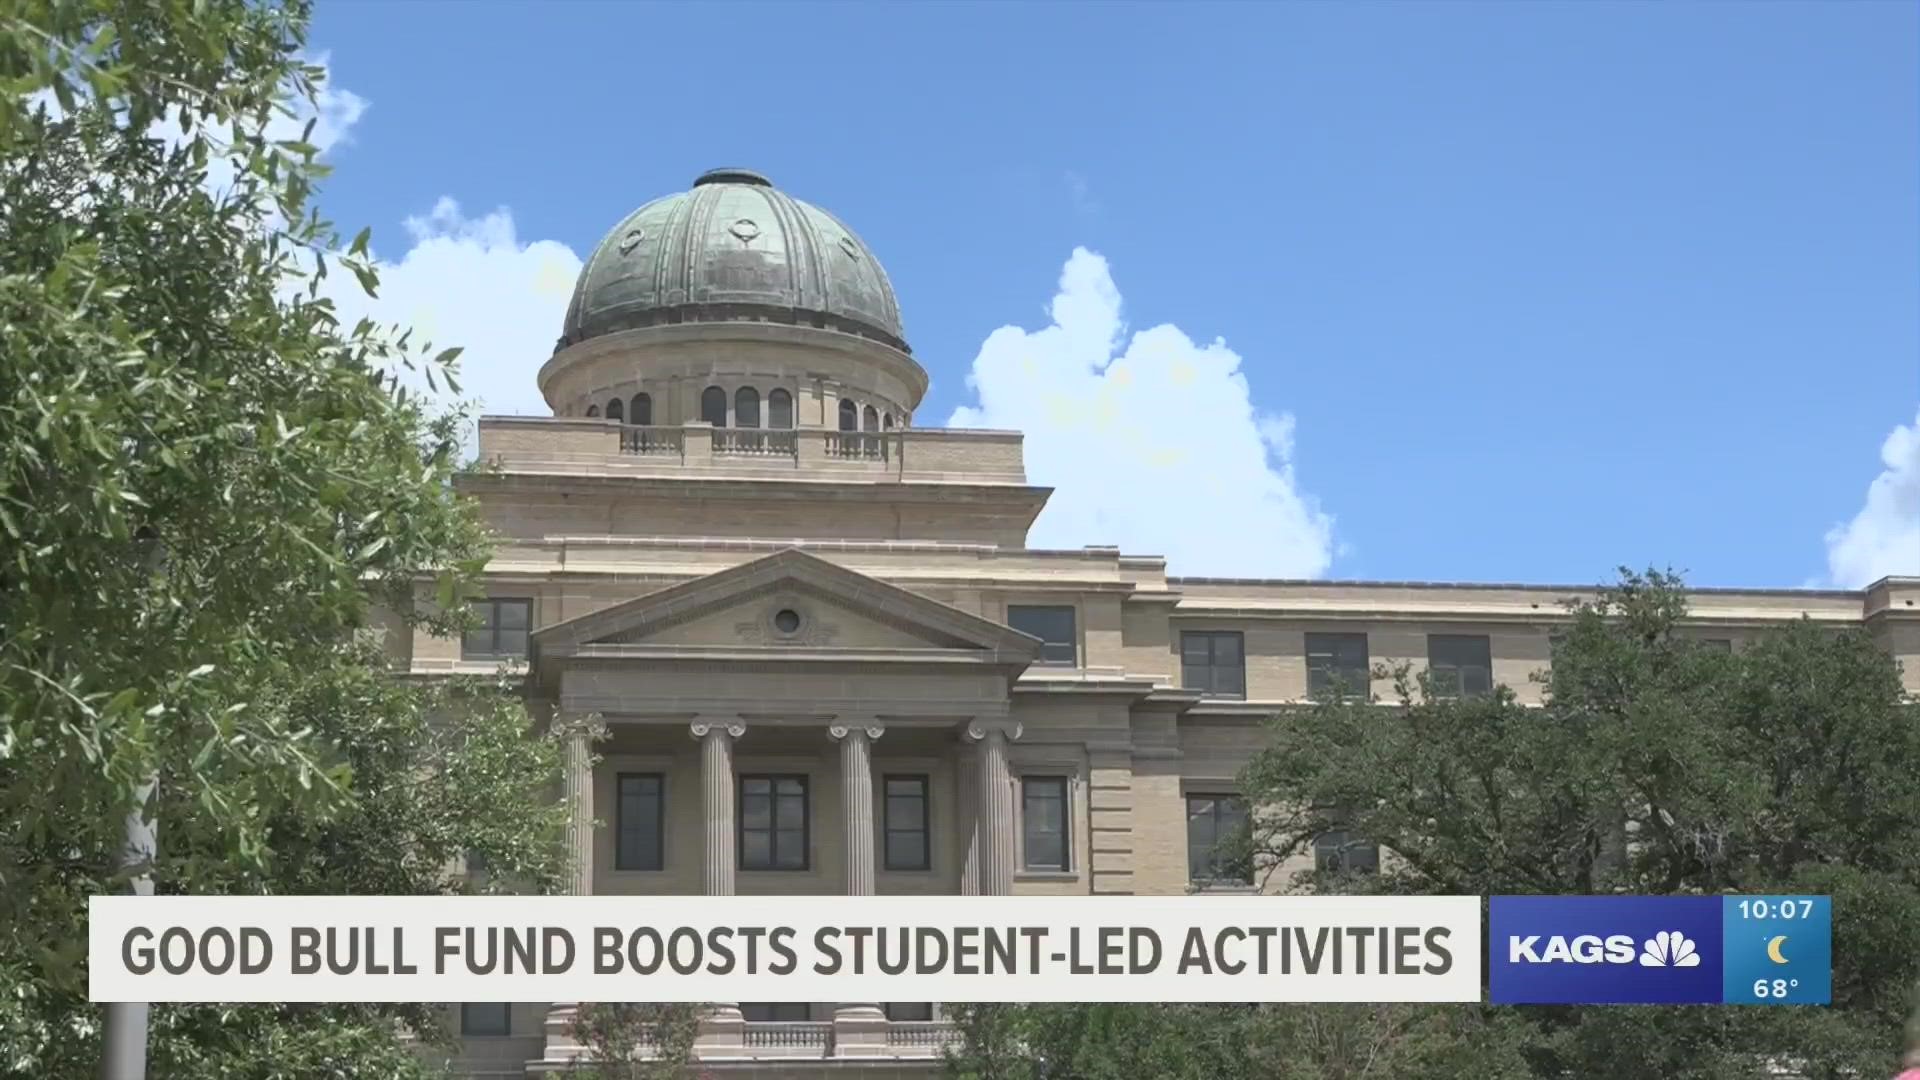 Texas A&M University’s Good Bull Fund is a brand-new initiative created by President Katherine Banks to support student organizations and their functions.